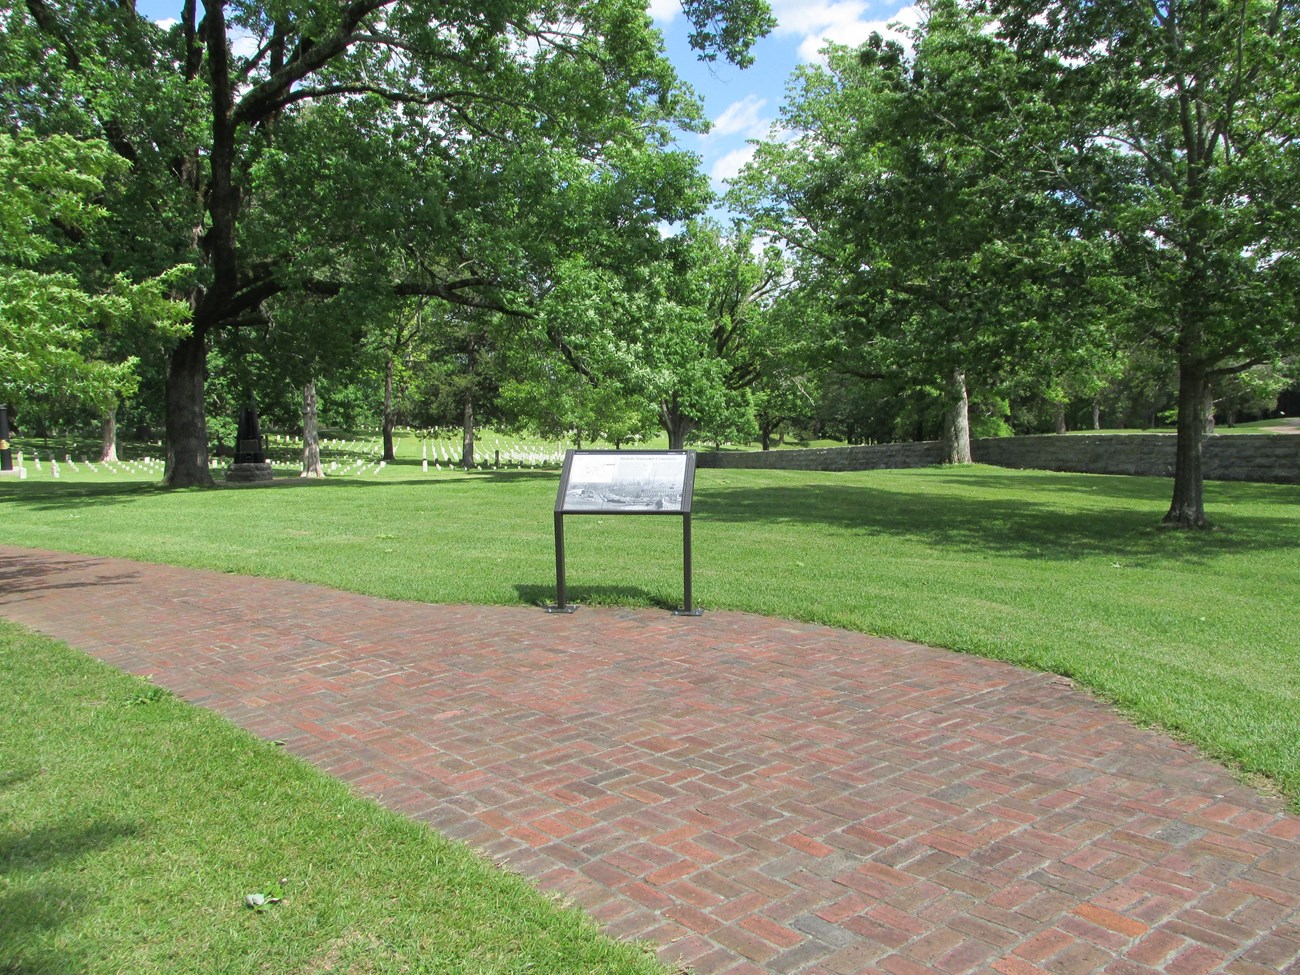 New Wayside Exhibit in National Cemetery